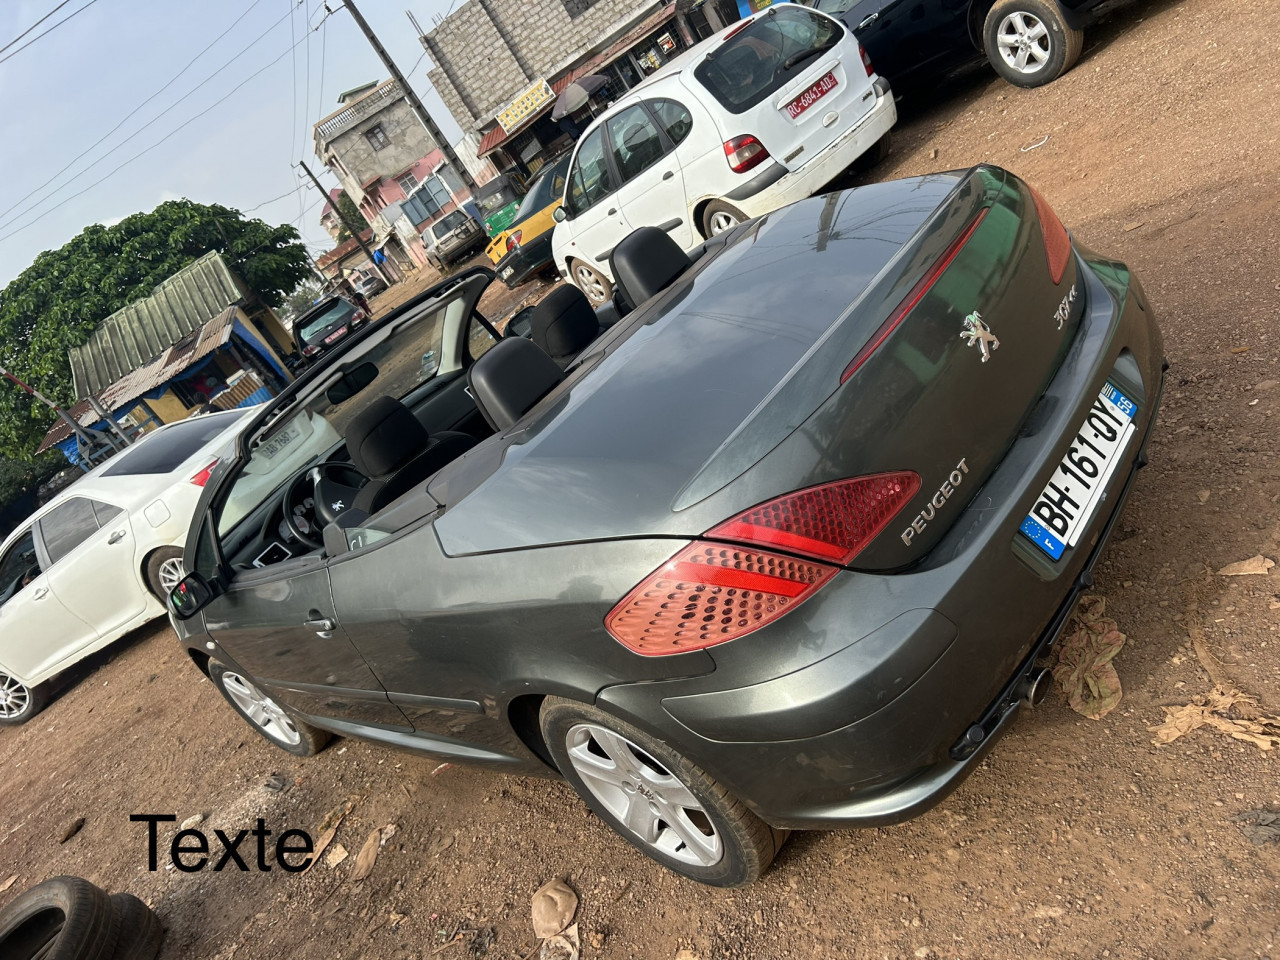 Peugeot 307, Voitures, Conakry